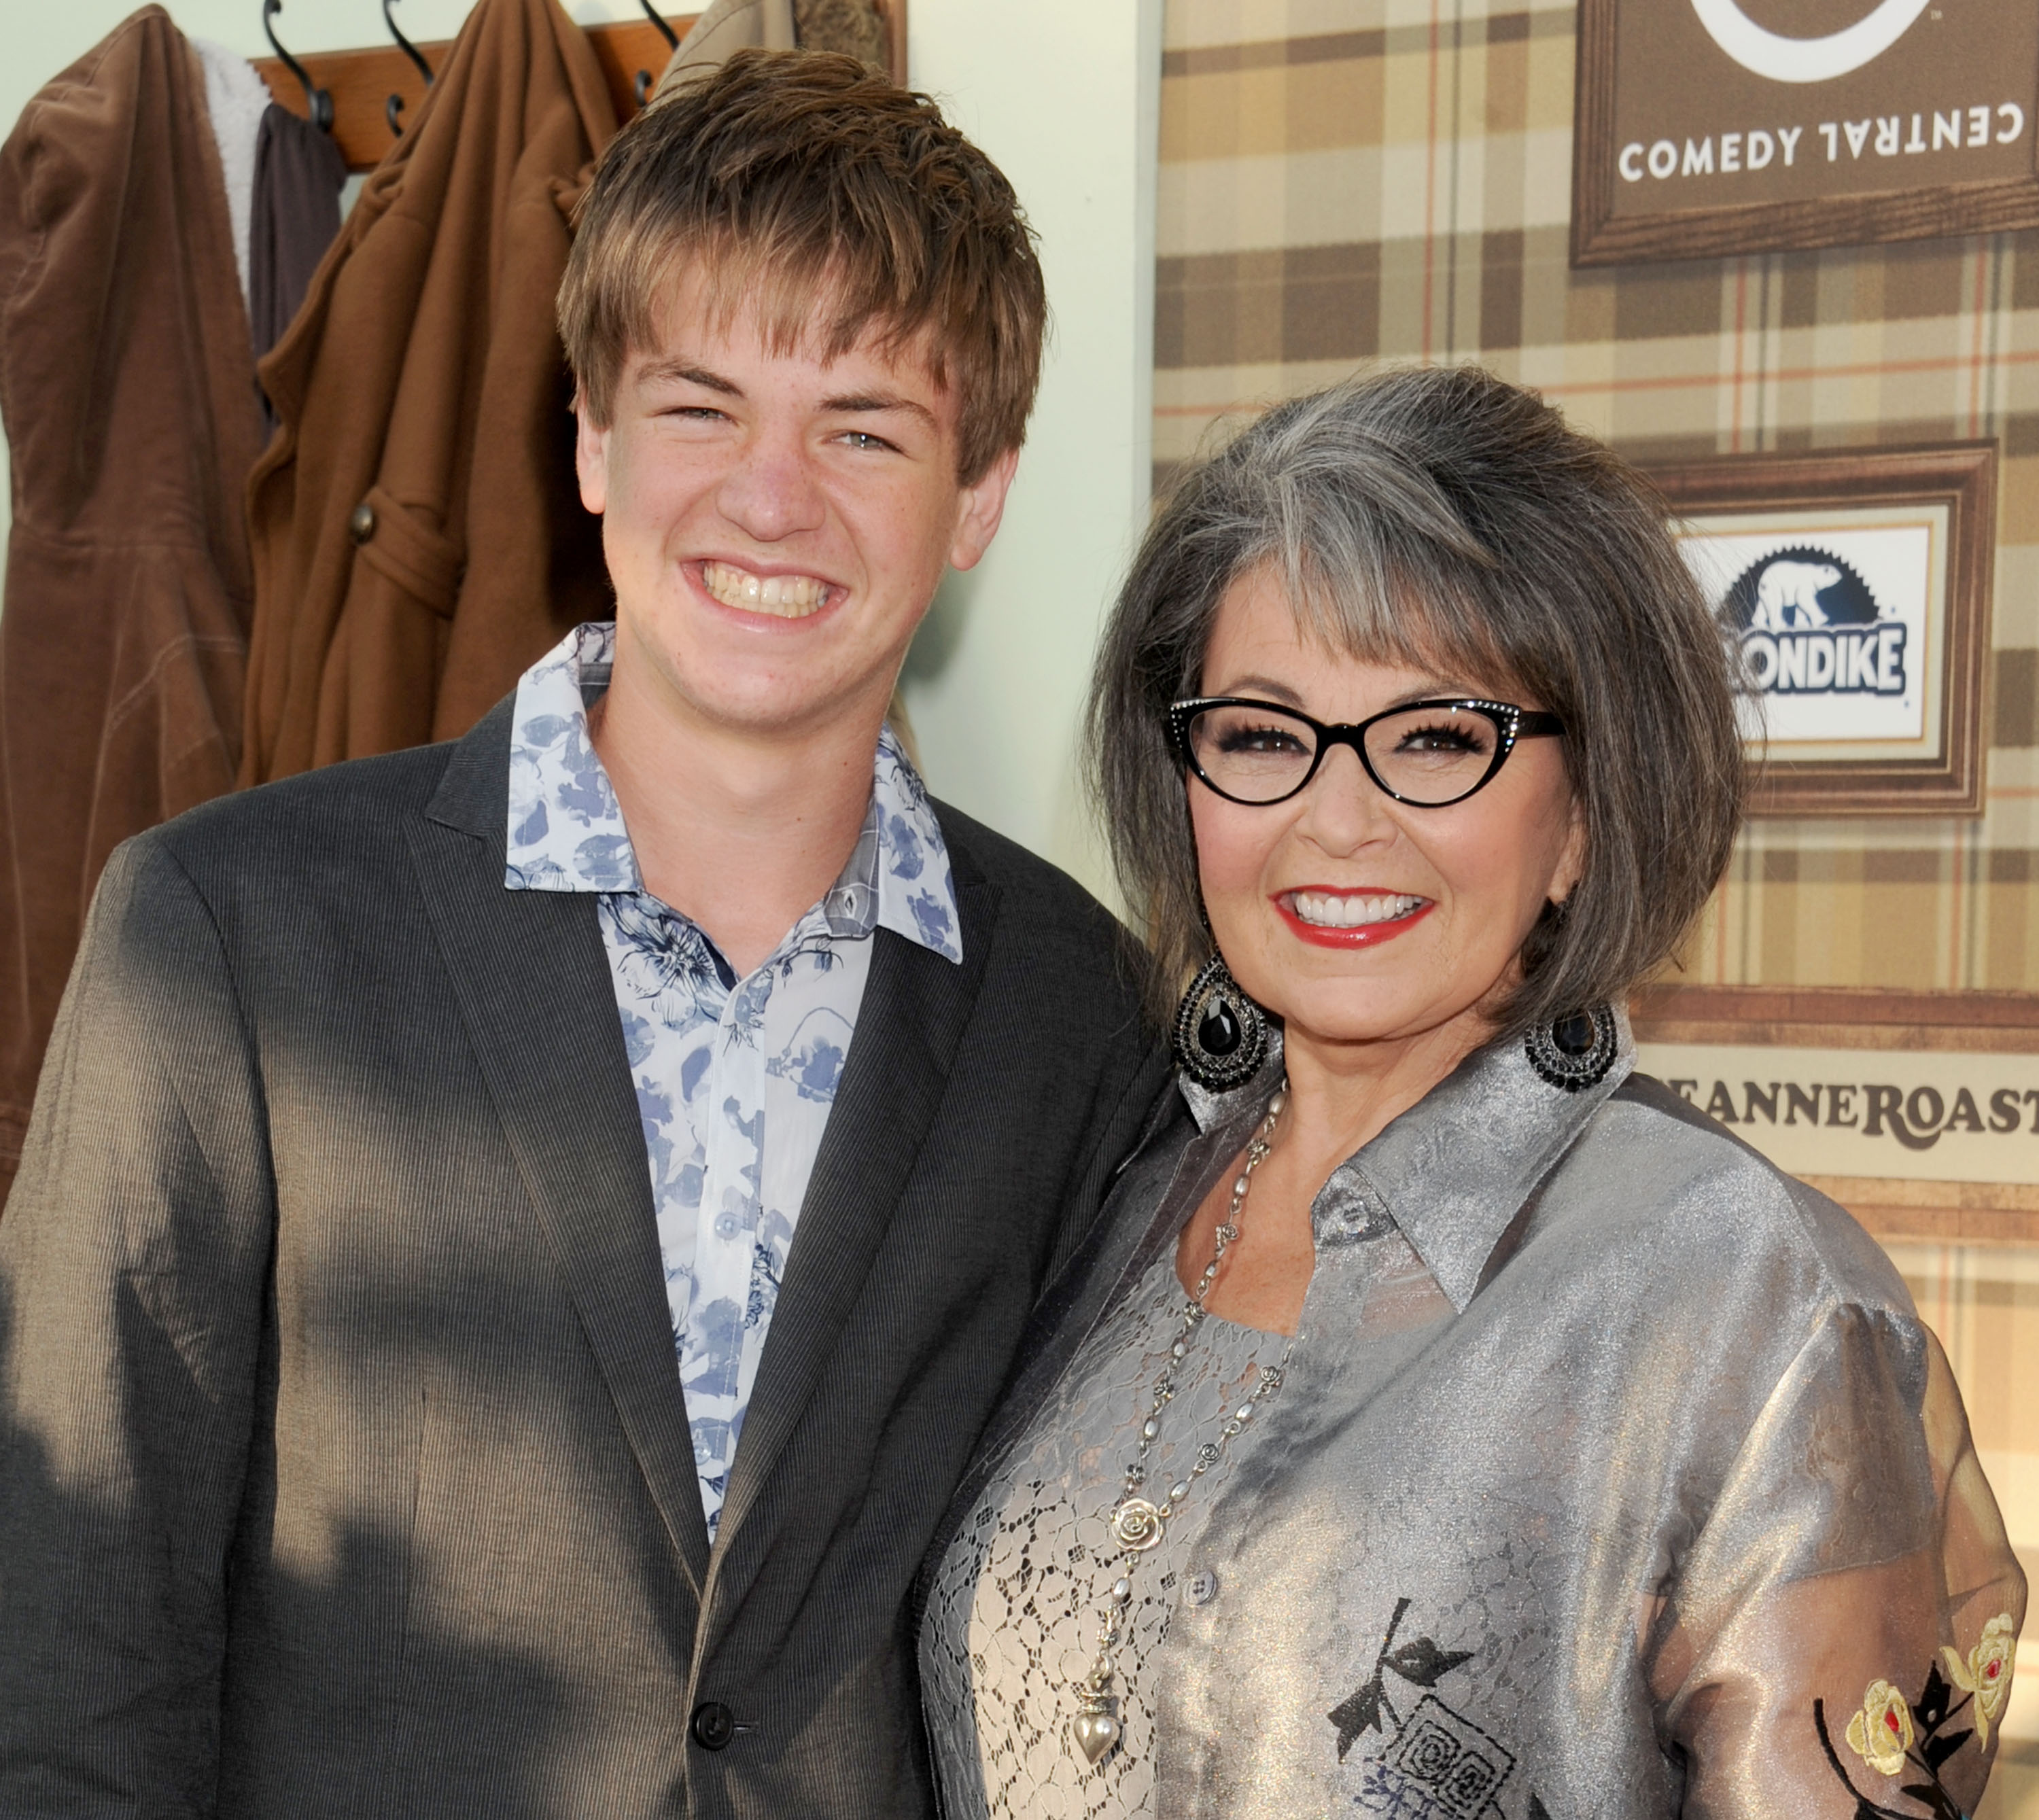 Actress Roseanne Barr (R) and son Buck Thomas arrive at the Comedy Central Roast of Roseanne Barr at Hollywood Palladium on August 4, 2012 in Hollywood, California. | Source: Getty Images